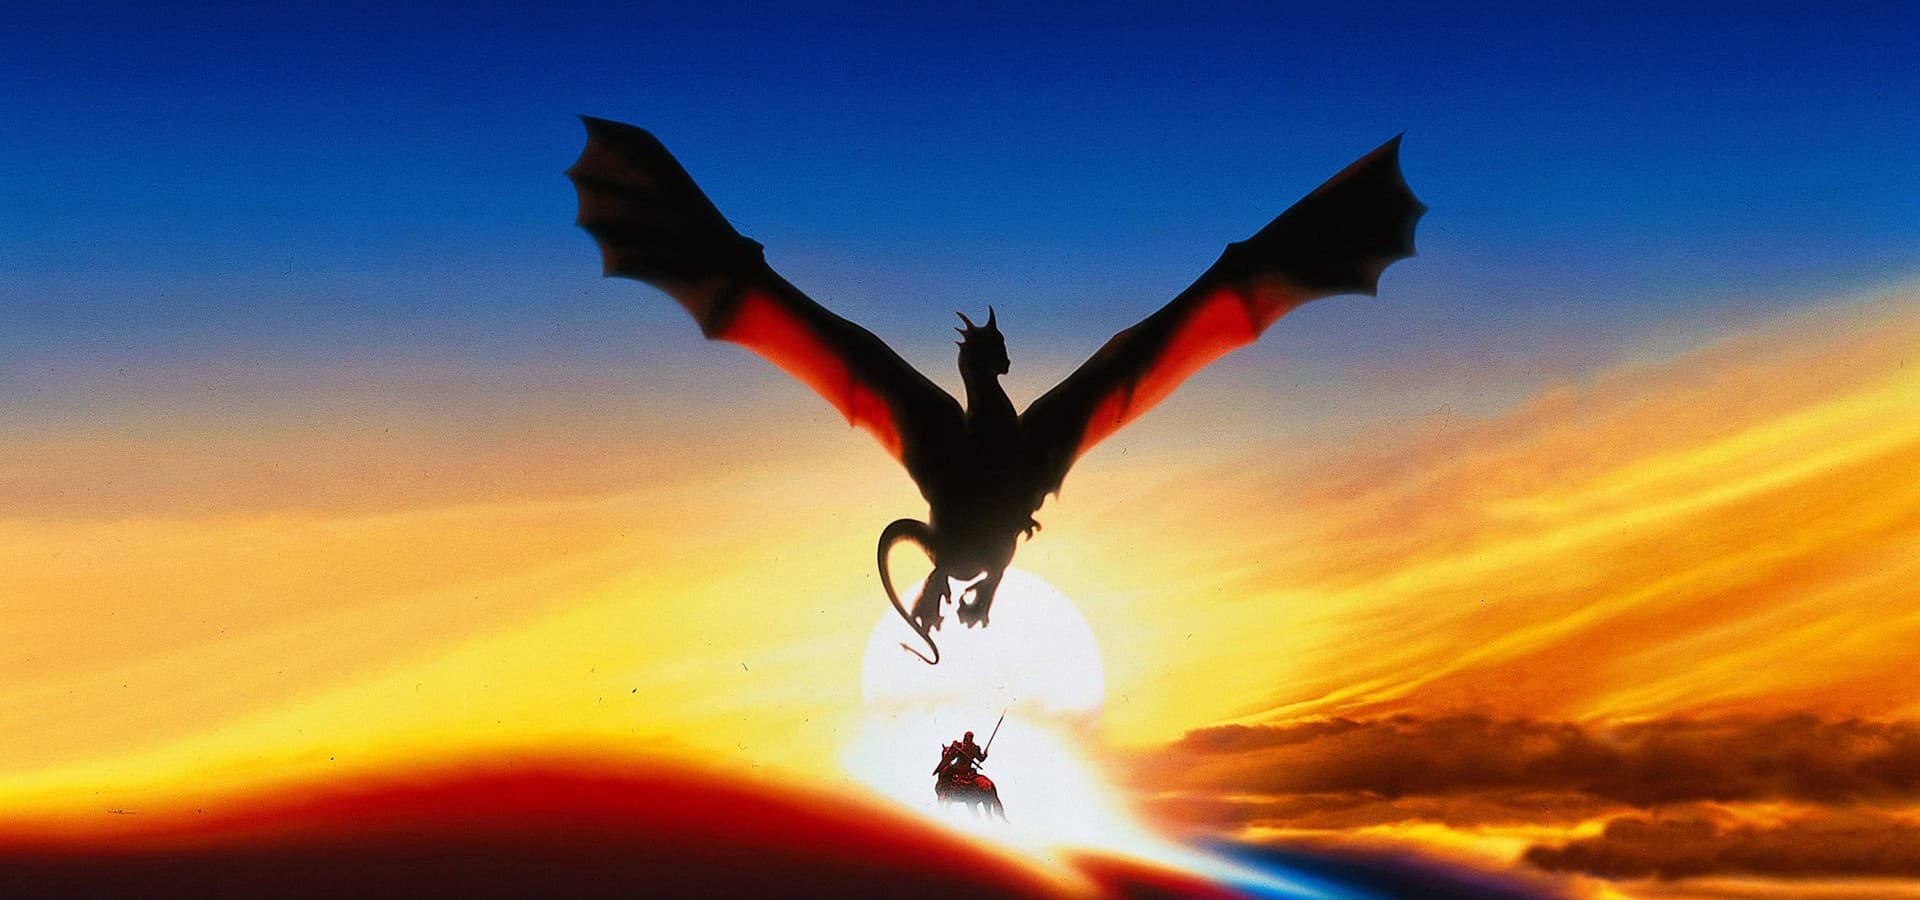 years on, how the 1990s changed Dragonheart